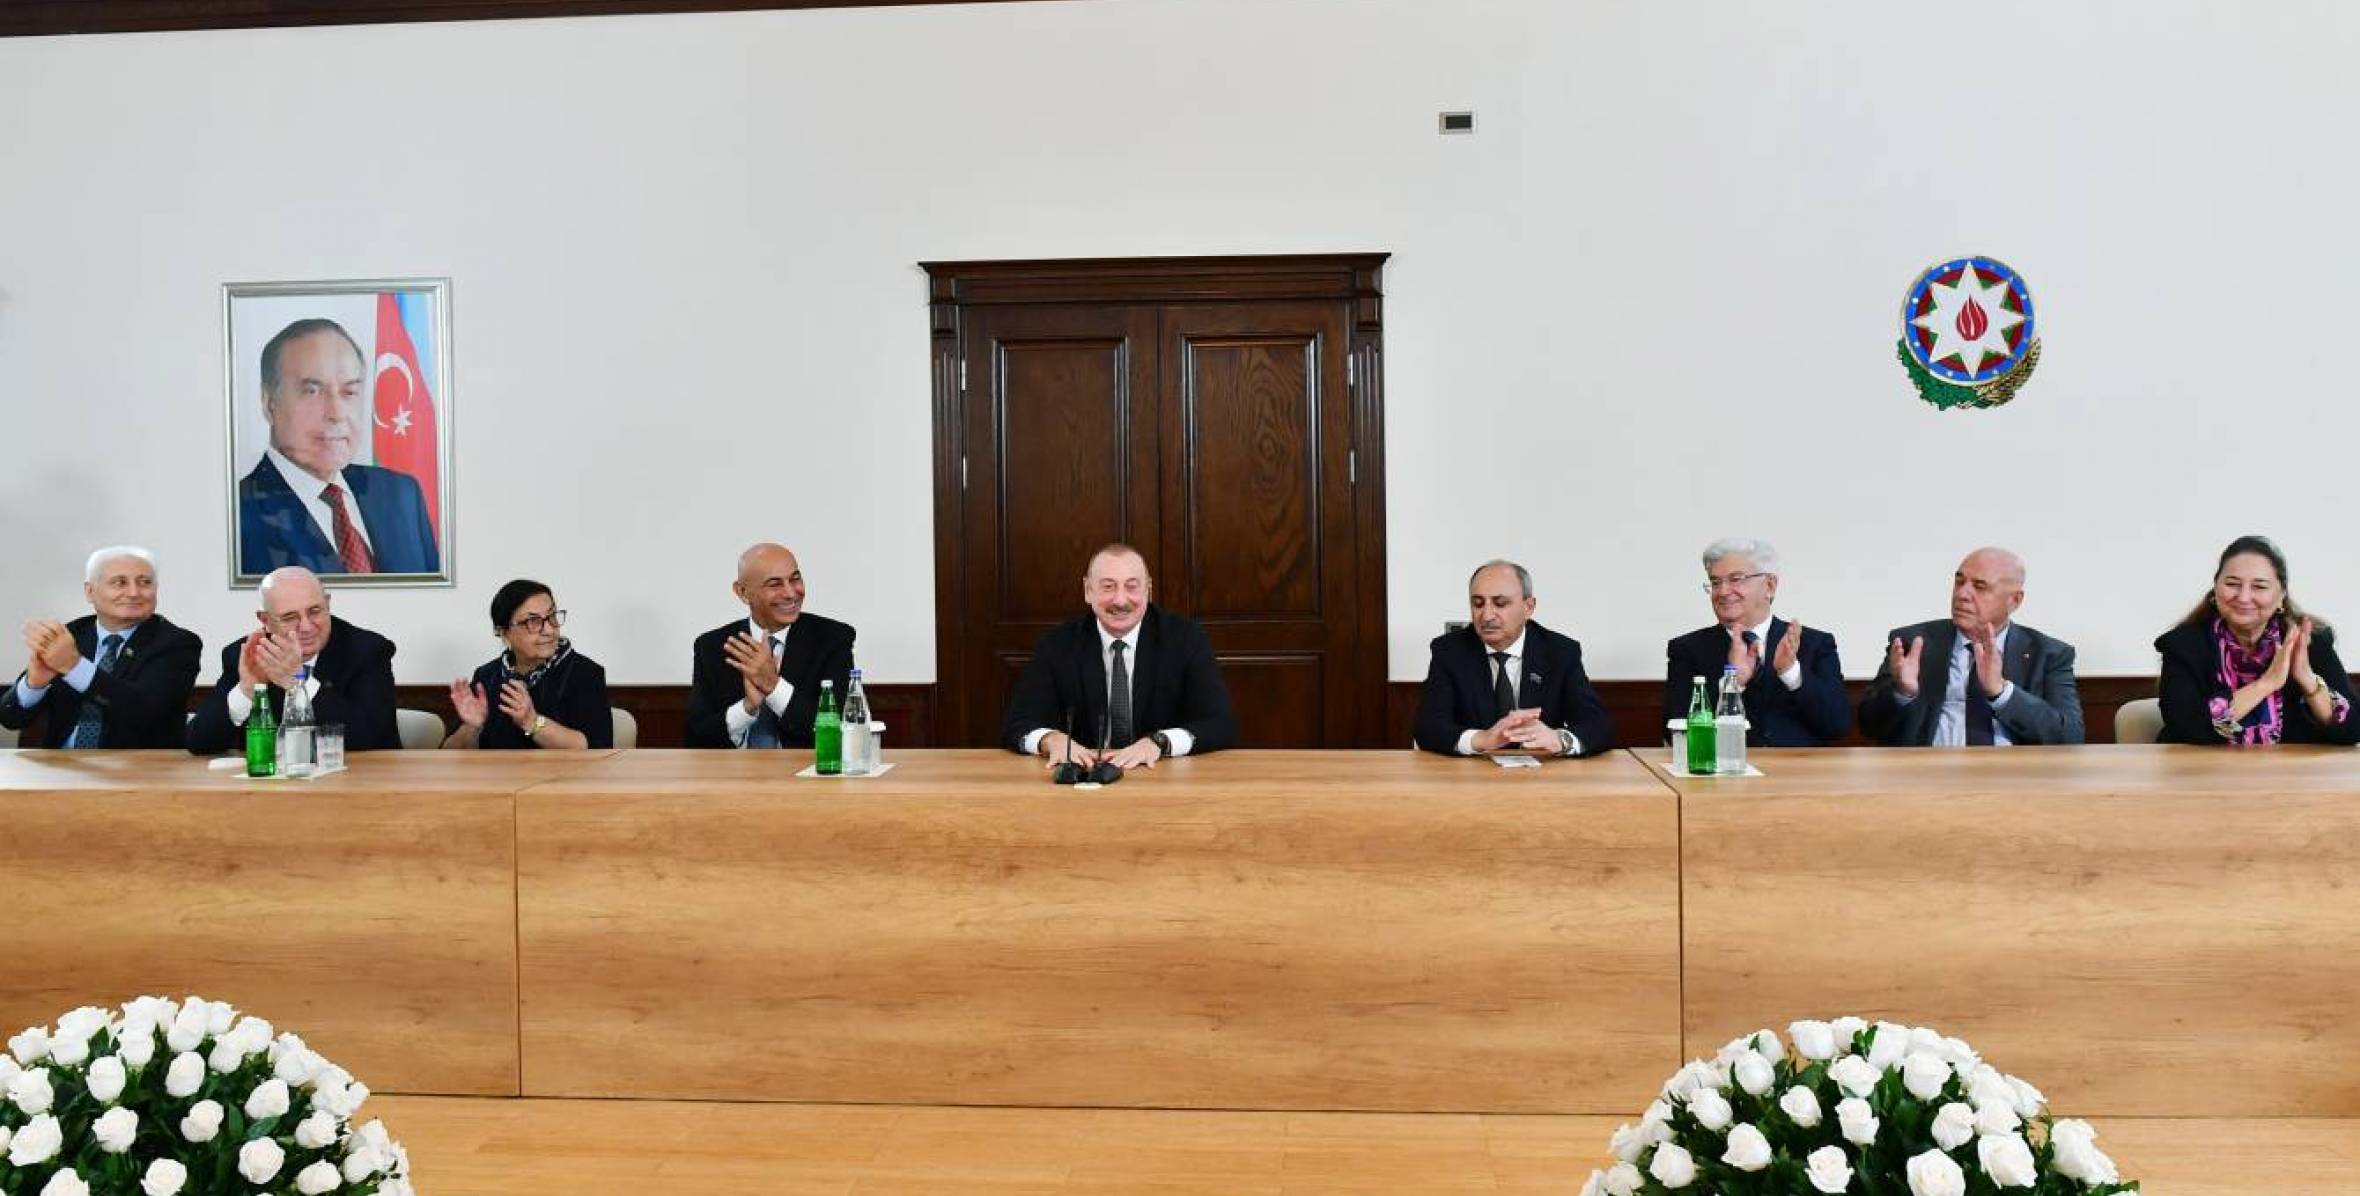 Speech by Ilham Aliyev at the meeting with a group of intellectuals from Western Azerbaijan